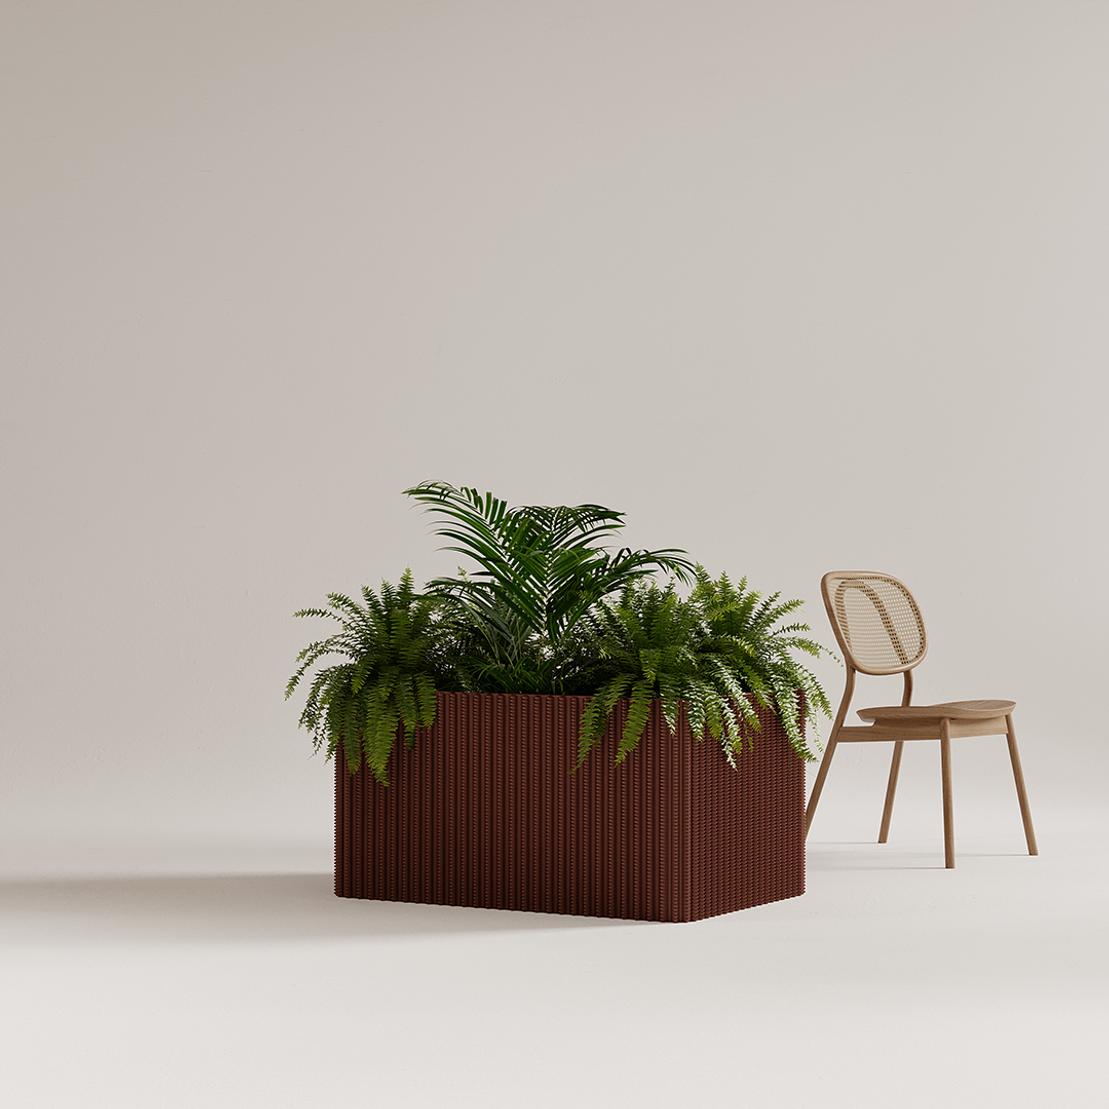 Boxy Planters add dimension to your indoor plants, offering the opportunity to establish a unified green aesthetic in your office or hospitality setting. Tailor the width, depth, and height to craft Boxy planters that seamlessly complement your interior.

Within each Boxy planter are smaller pots, facilitating effortless plant upkeep. Select a texture 'wrap' that suits your preference, and coordinate it with our 'Wrap' wall panels to achieve a cohesive visual appeal. Presently, the following textures are at your disposal:

1. Pleat
2. Wave
3. Halfpipe
4. Cannelure
5. Knit
6. Base